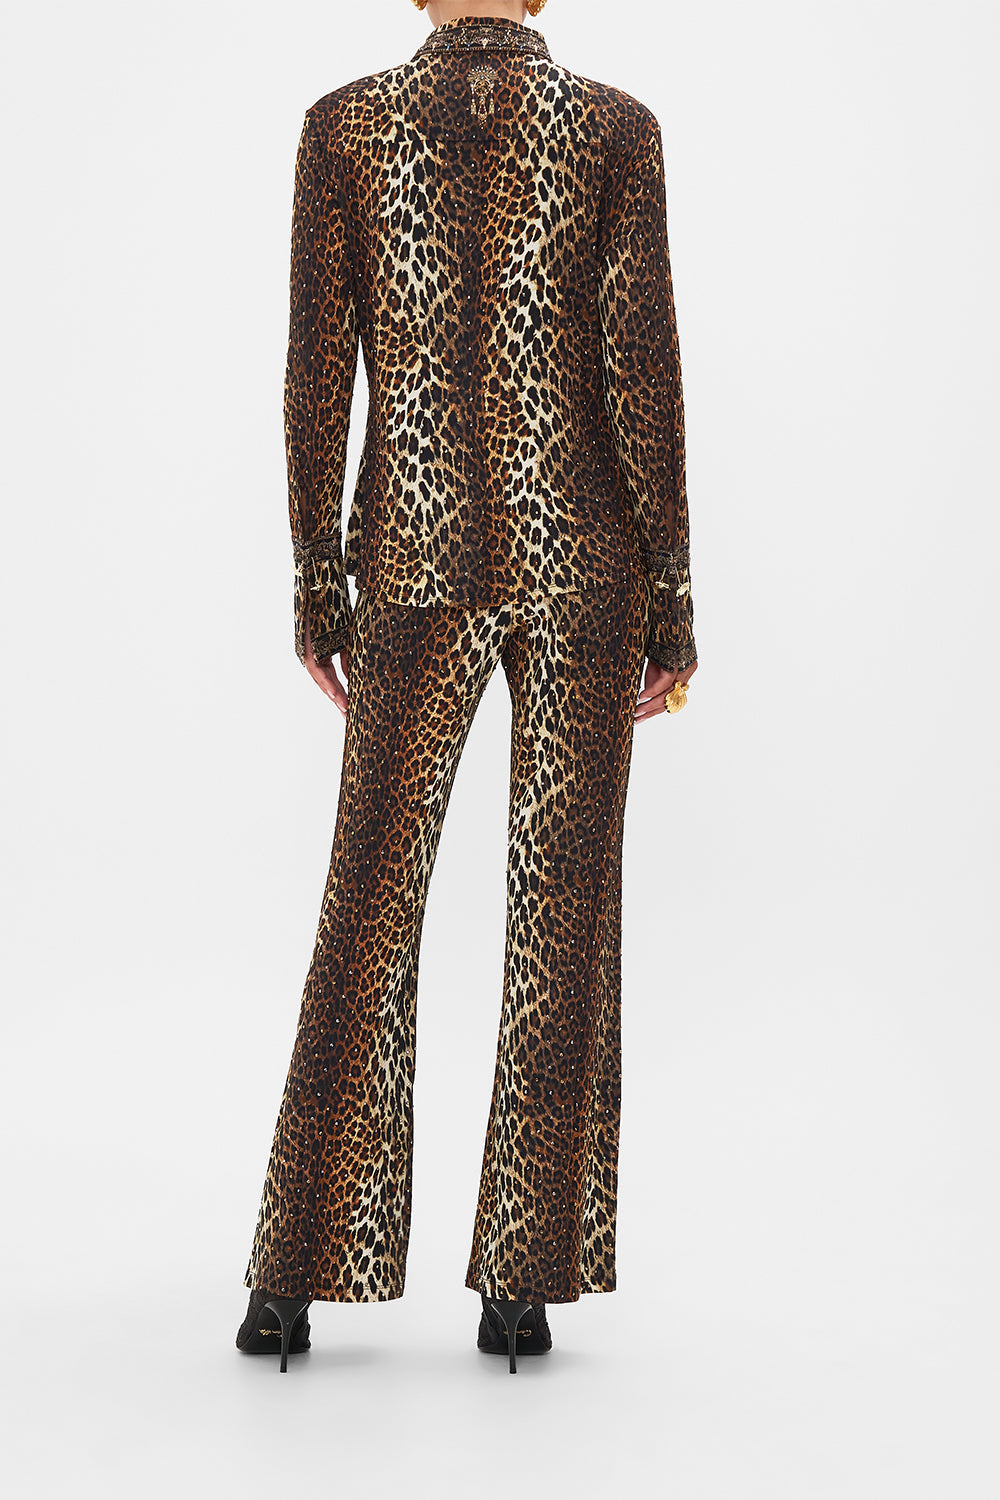 CAMILLA Leopard Fitted Jersey Shirt in Amsterglam